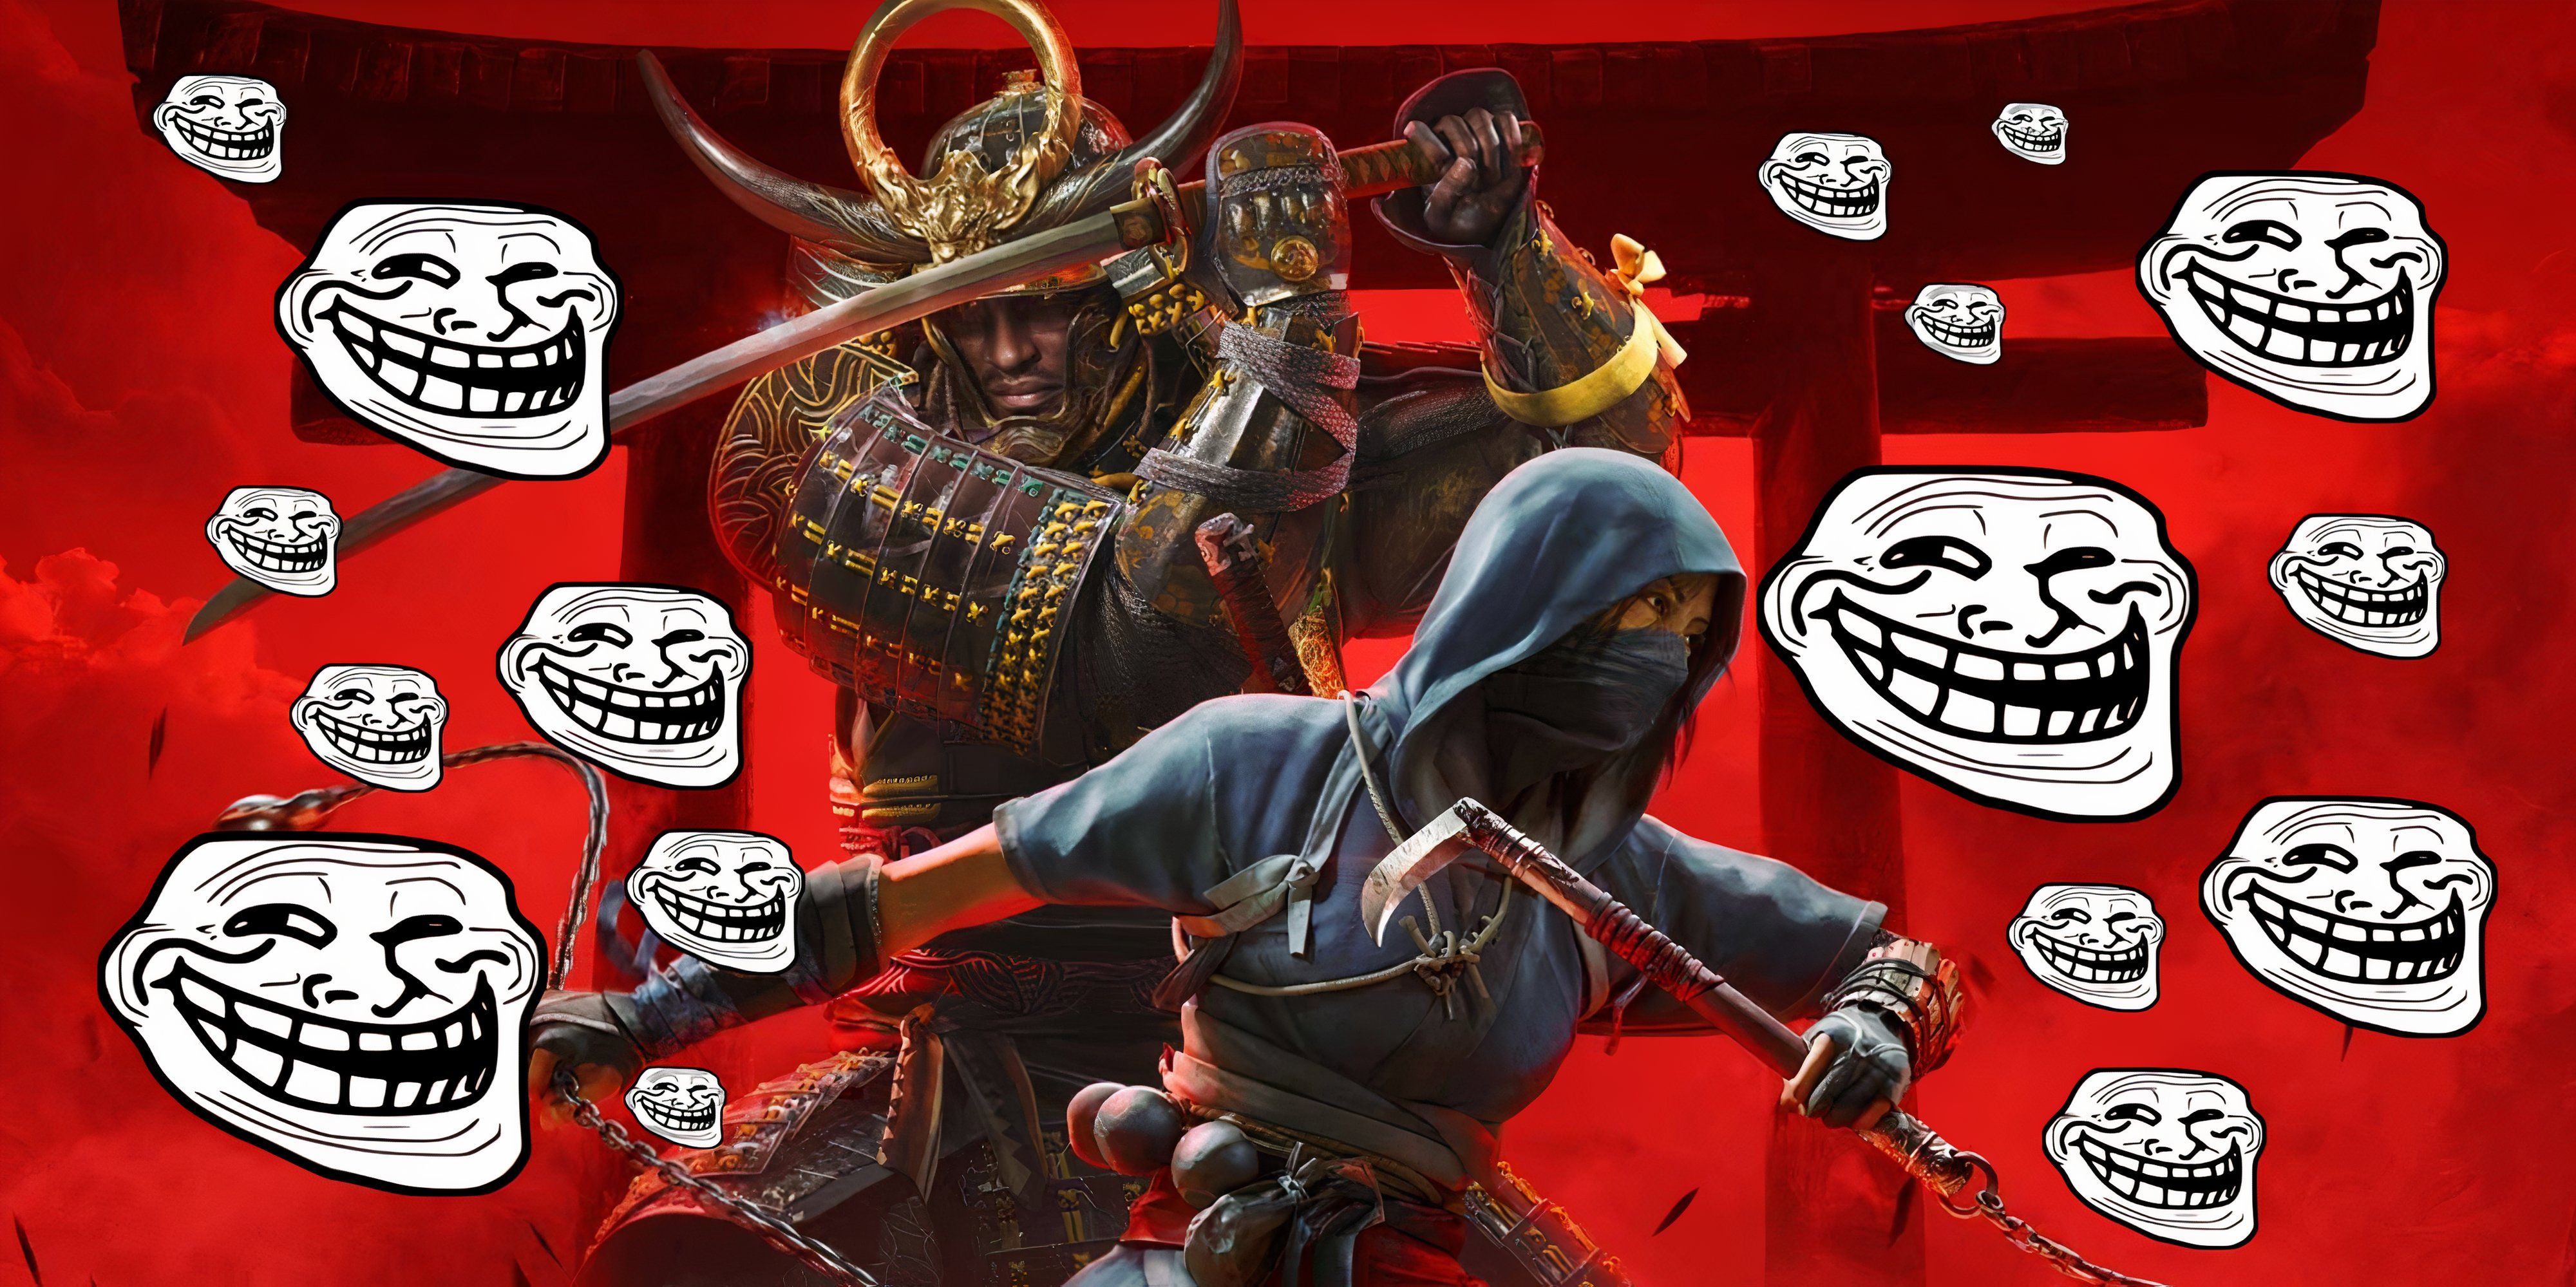 Assassins Creed Shadows characters surrounded by troll faces